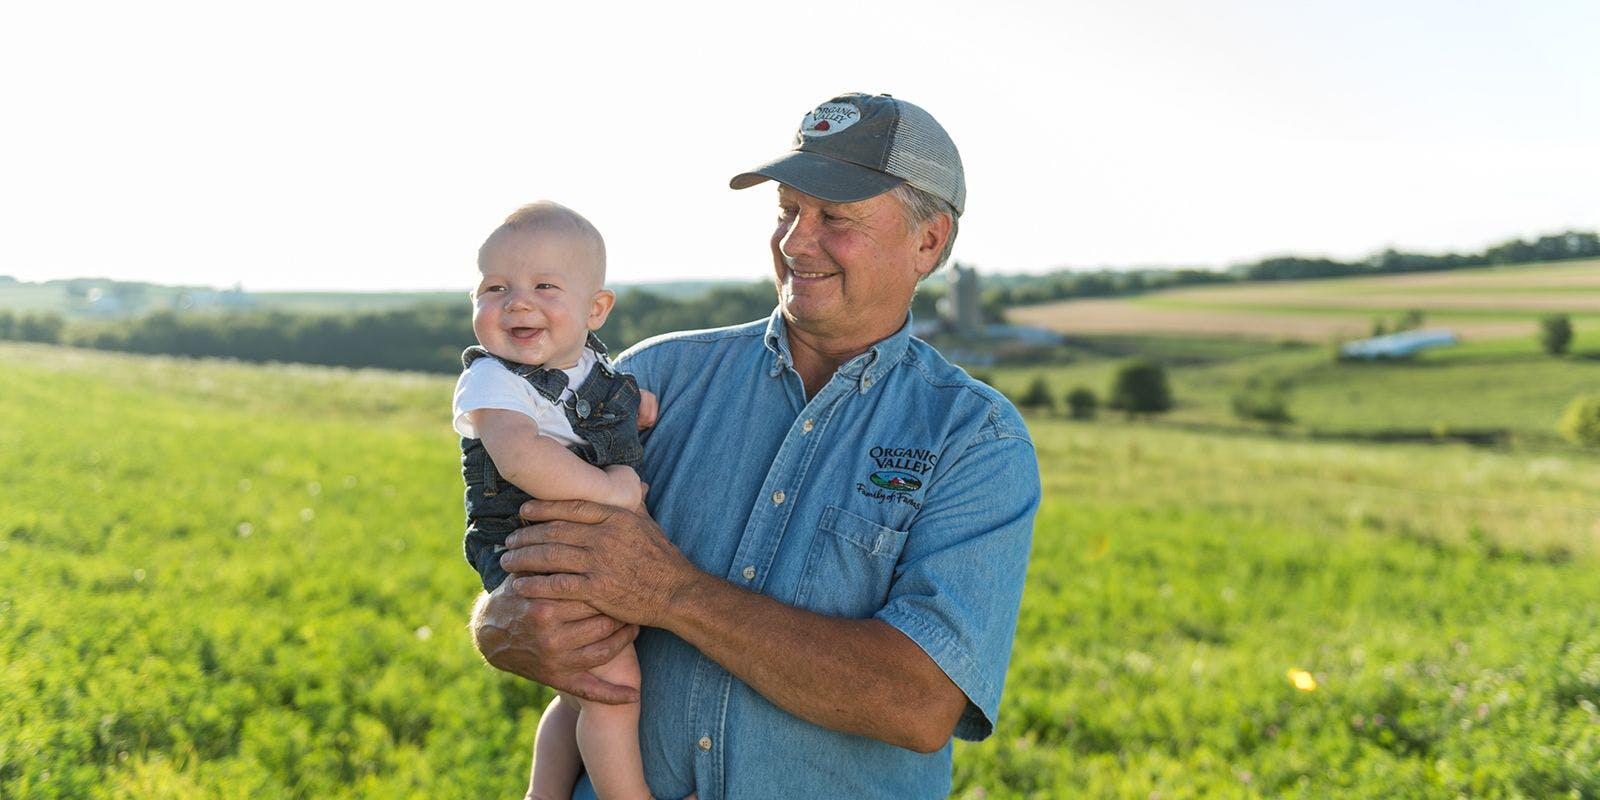 A farmer standing in a pasture holding his grandson who is smiling at something off camera.